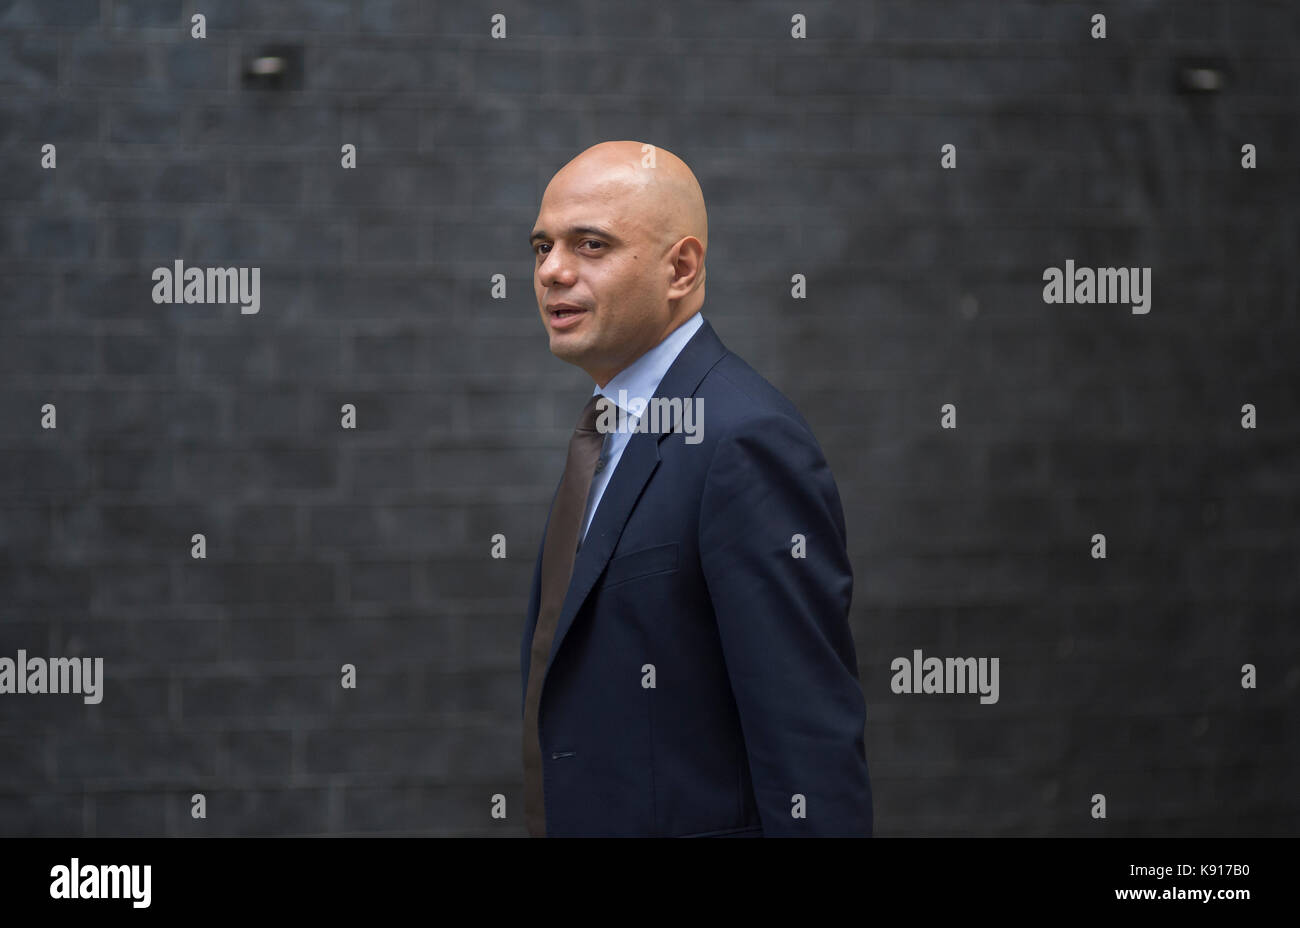 Downing Street, London, UK. 21 September 2017. PM Theresa May calls a special cabinet meeting at No. 10 after her return from New York, before travelling to Florence on Friday 22nd Sept to give a major Brexit speech. Photo: Sajid Javid, Secretary of State for Communities and Local Government. Credit: Malcolm Park/Alamy Live News. Stock Photo